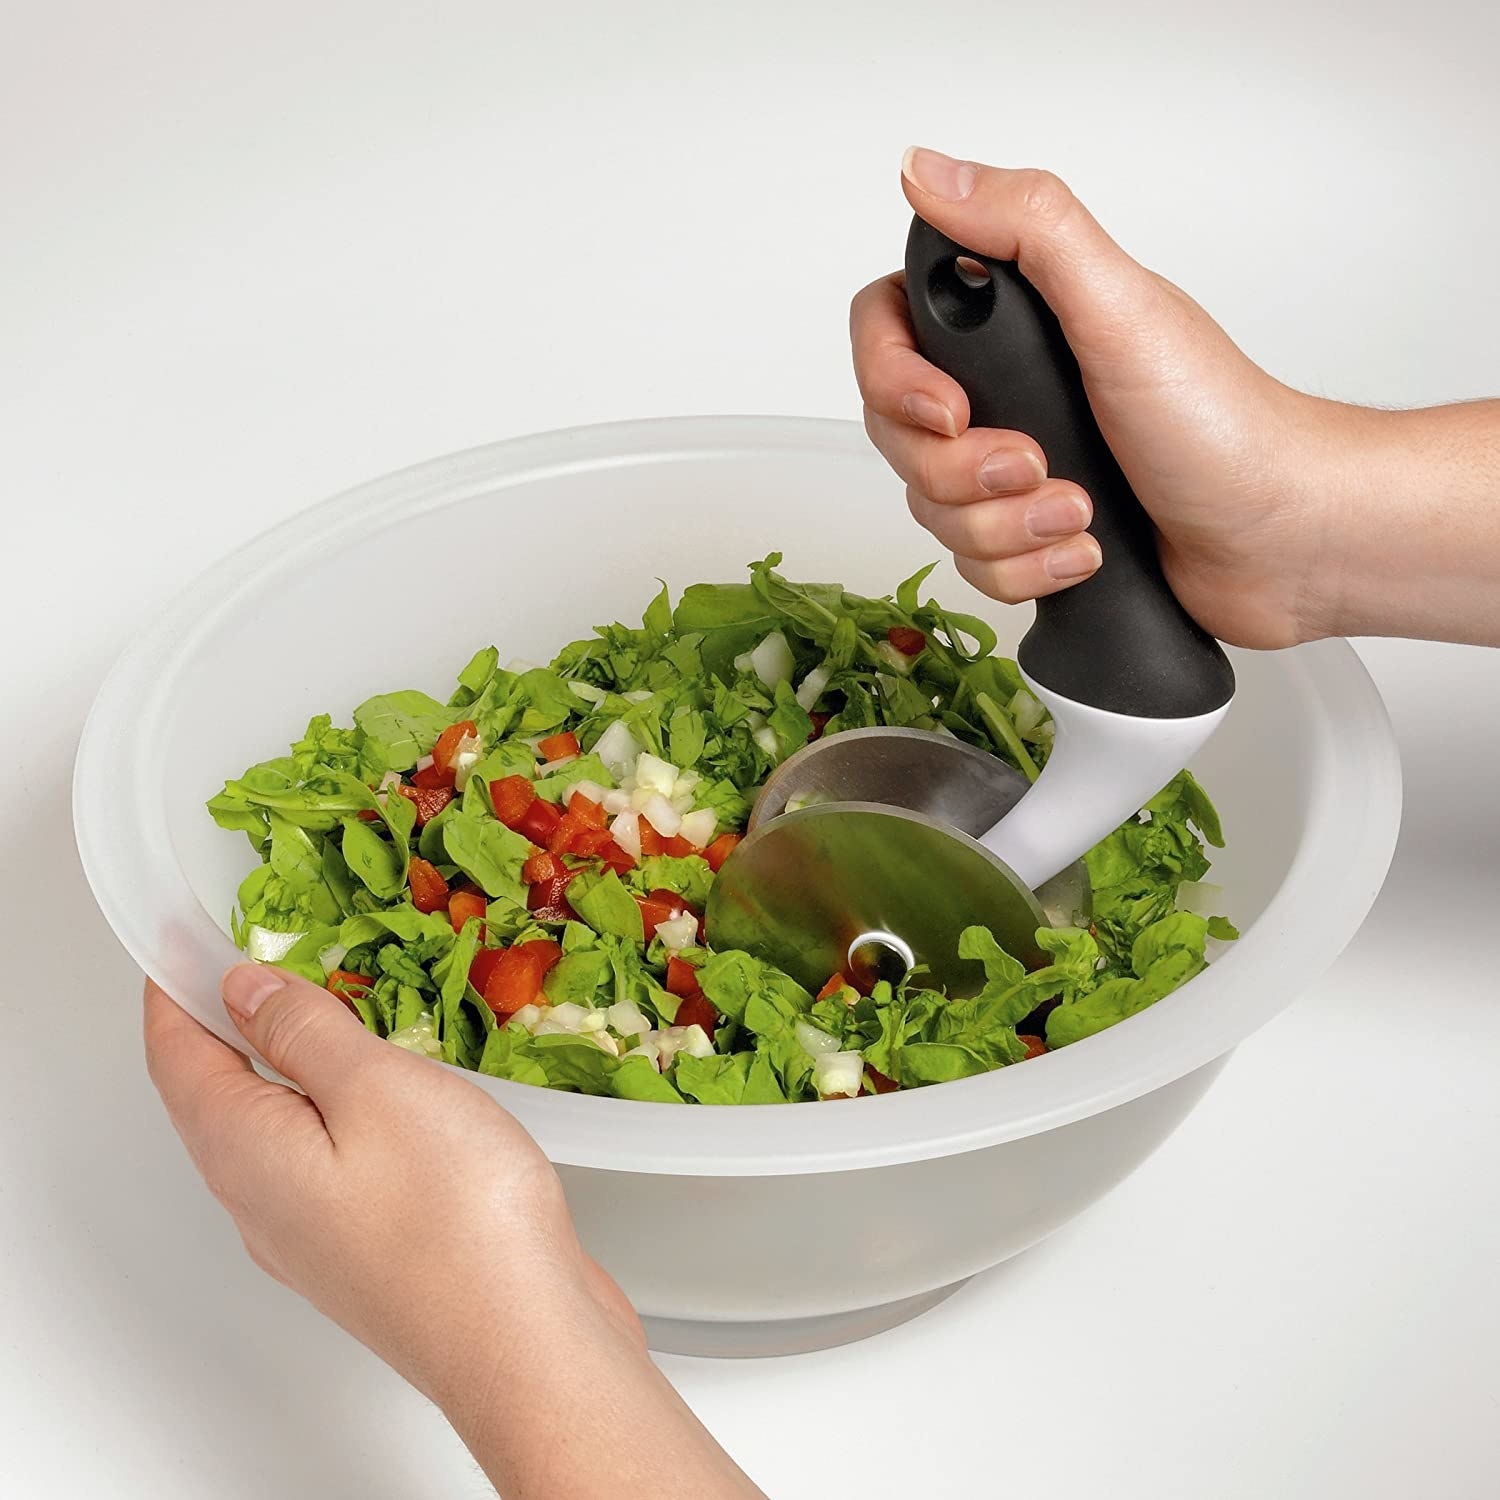 A bowl filled with salad vegetables being chopped with the tool inside.